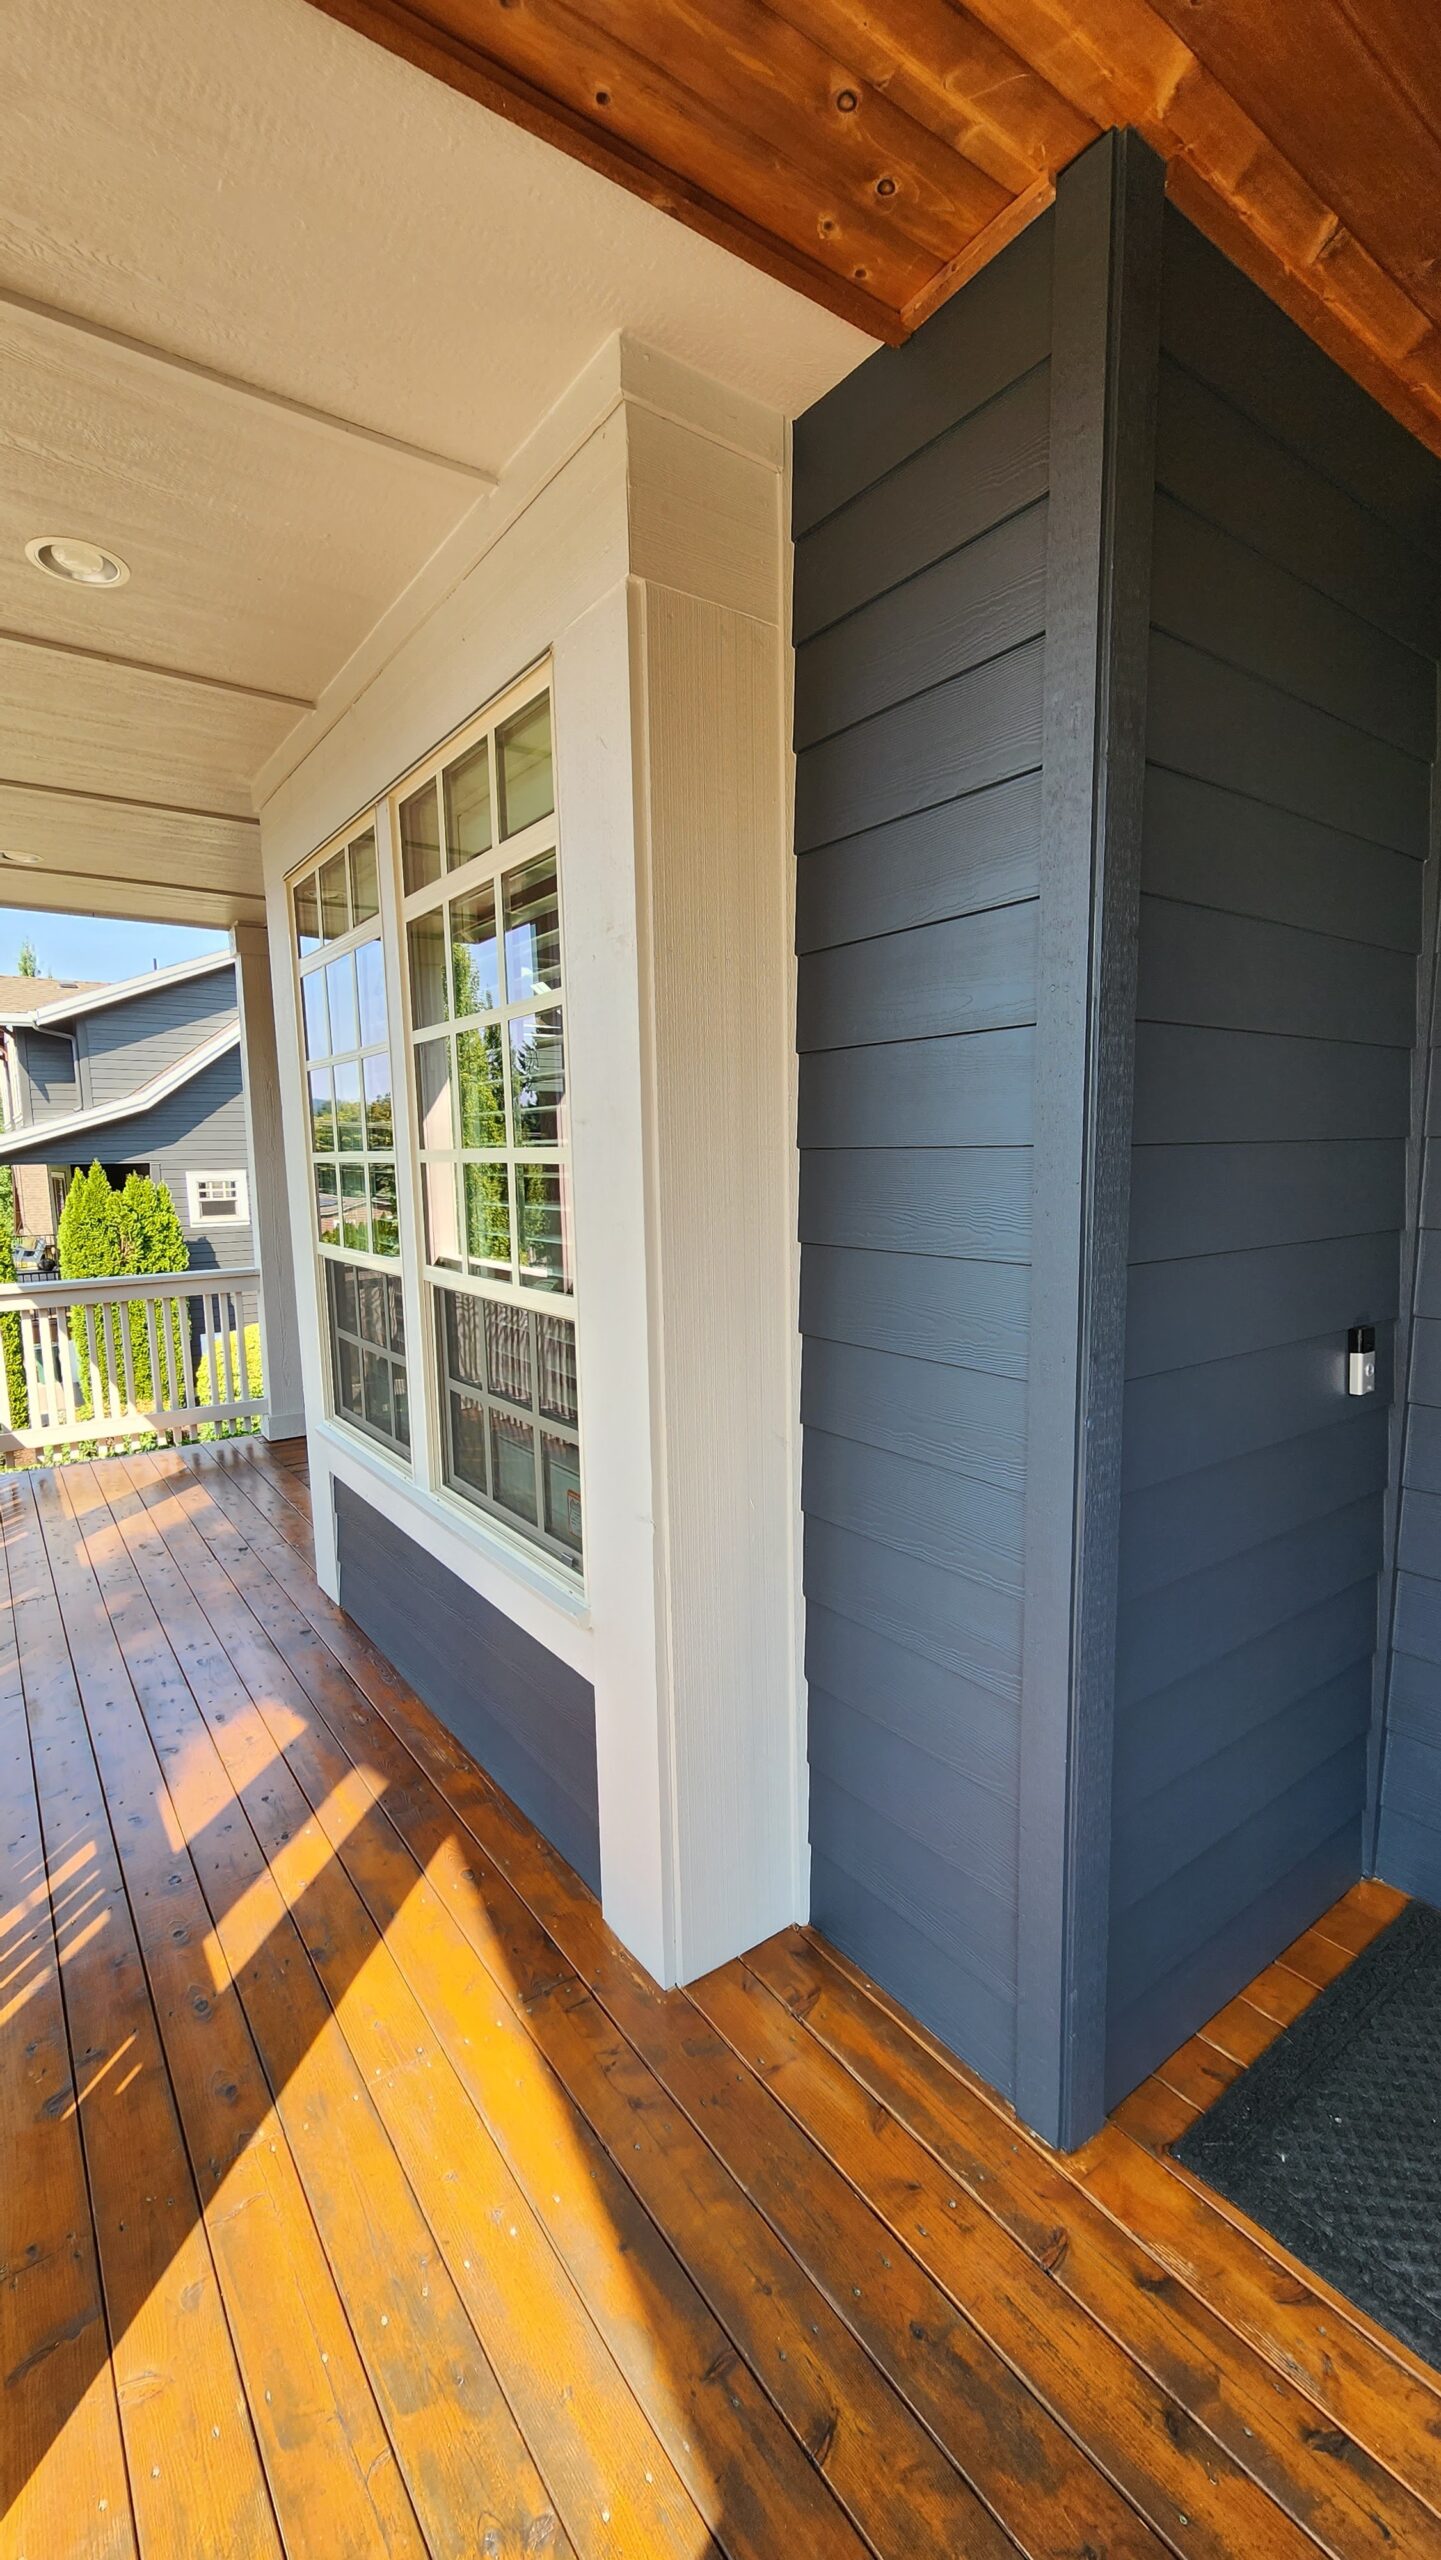 The front porch of a home with fresh blue siding and wood flooring.